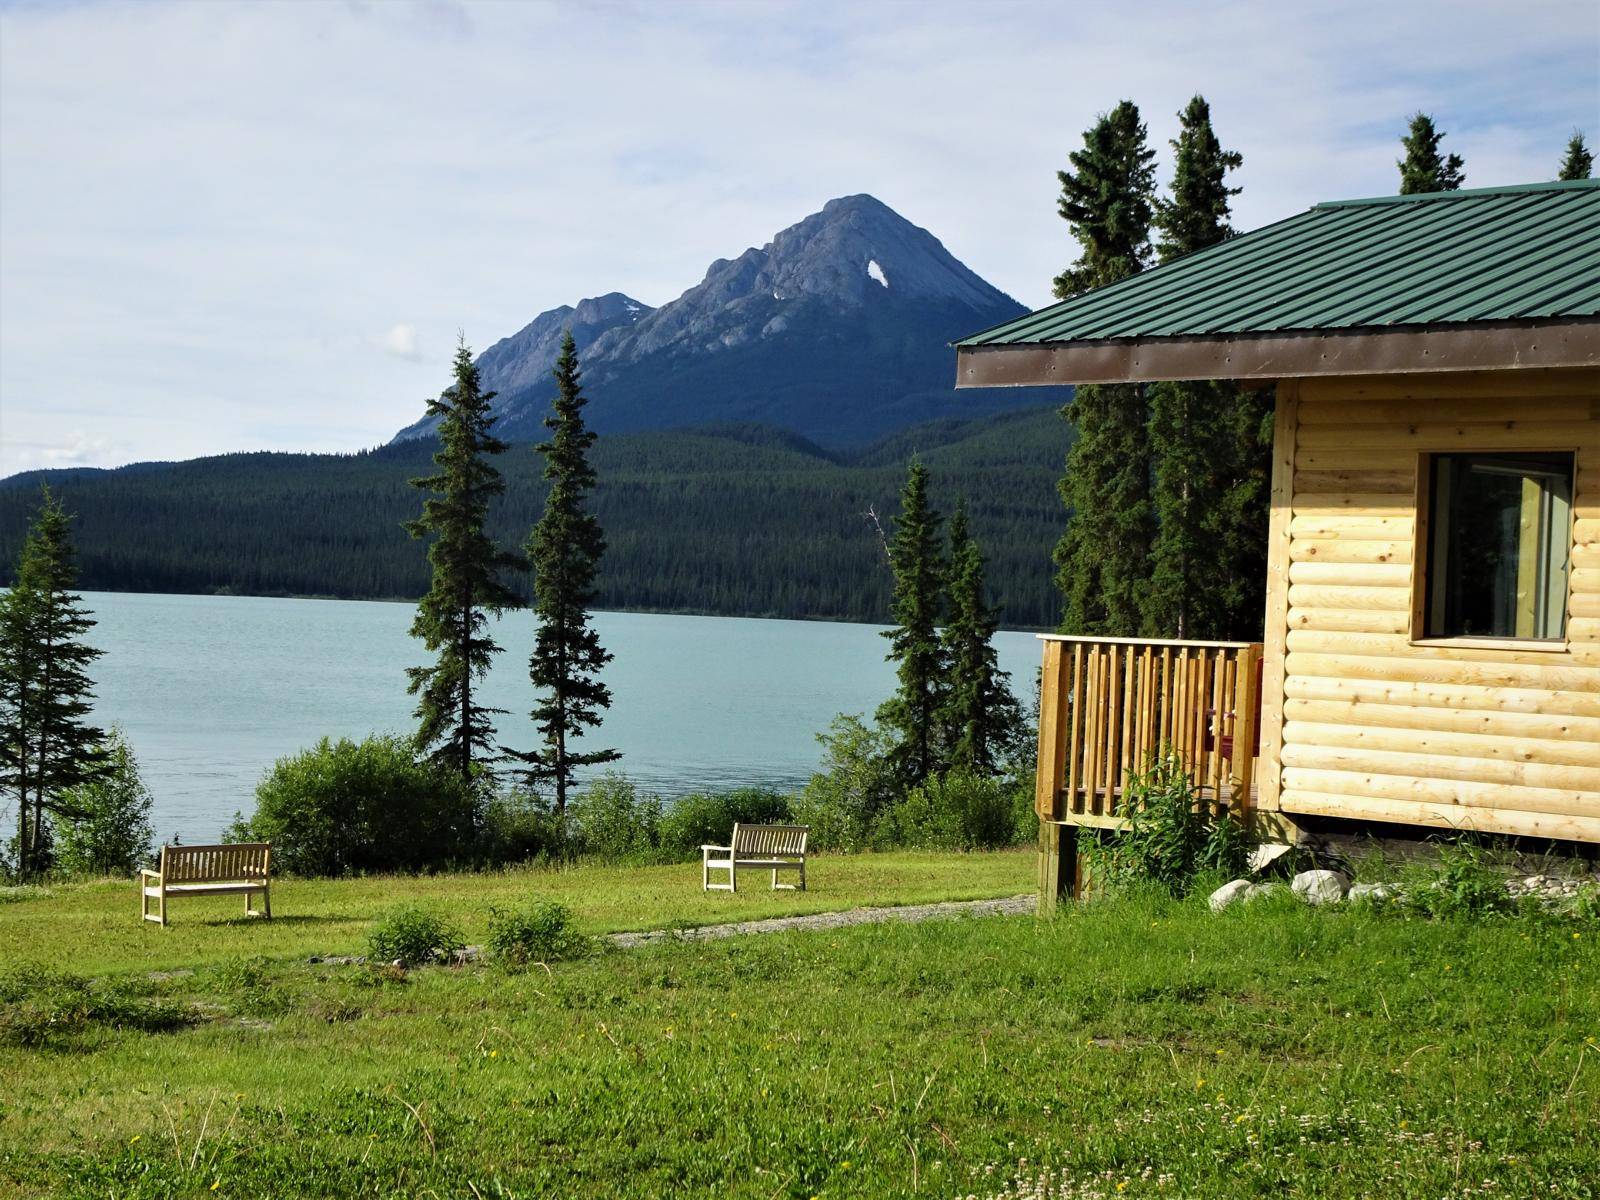 Cabin from side, view on lake and mountains